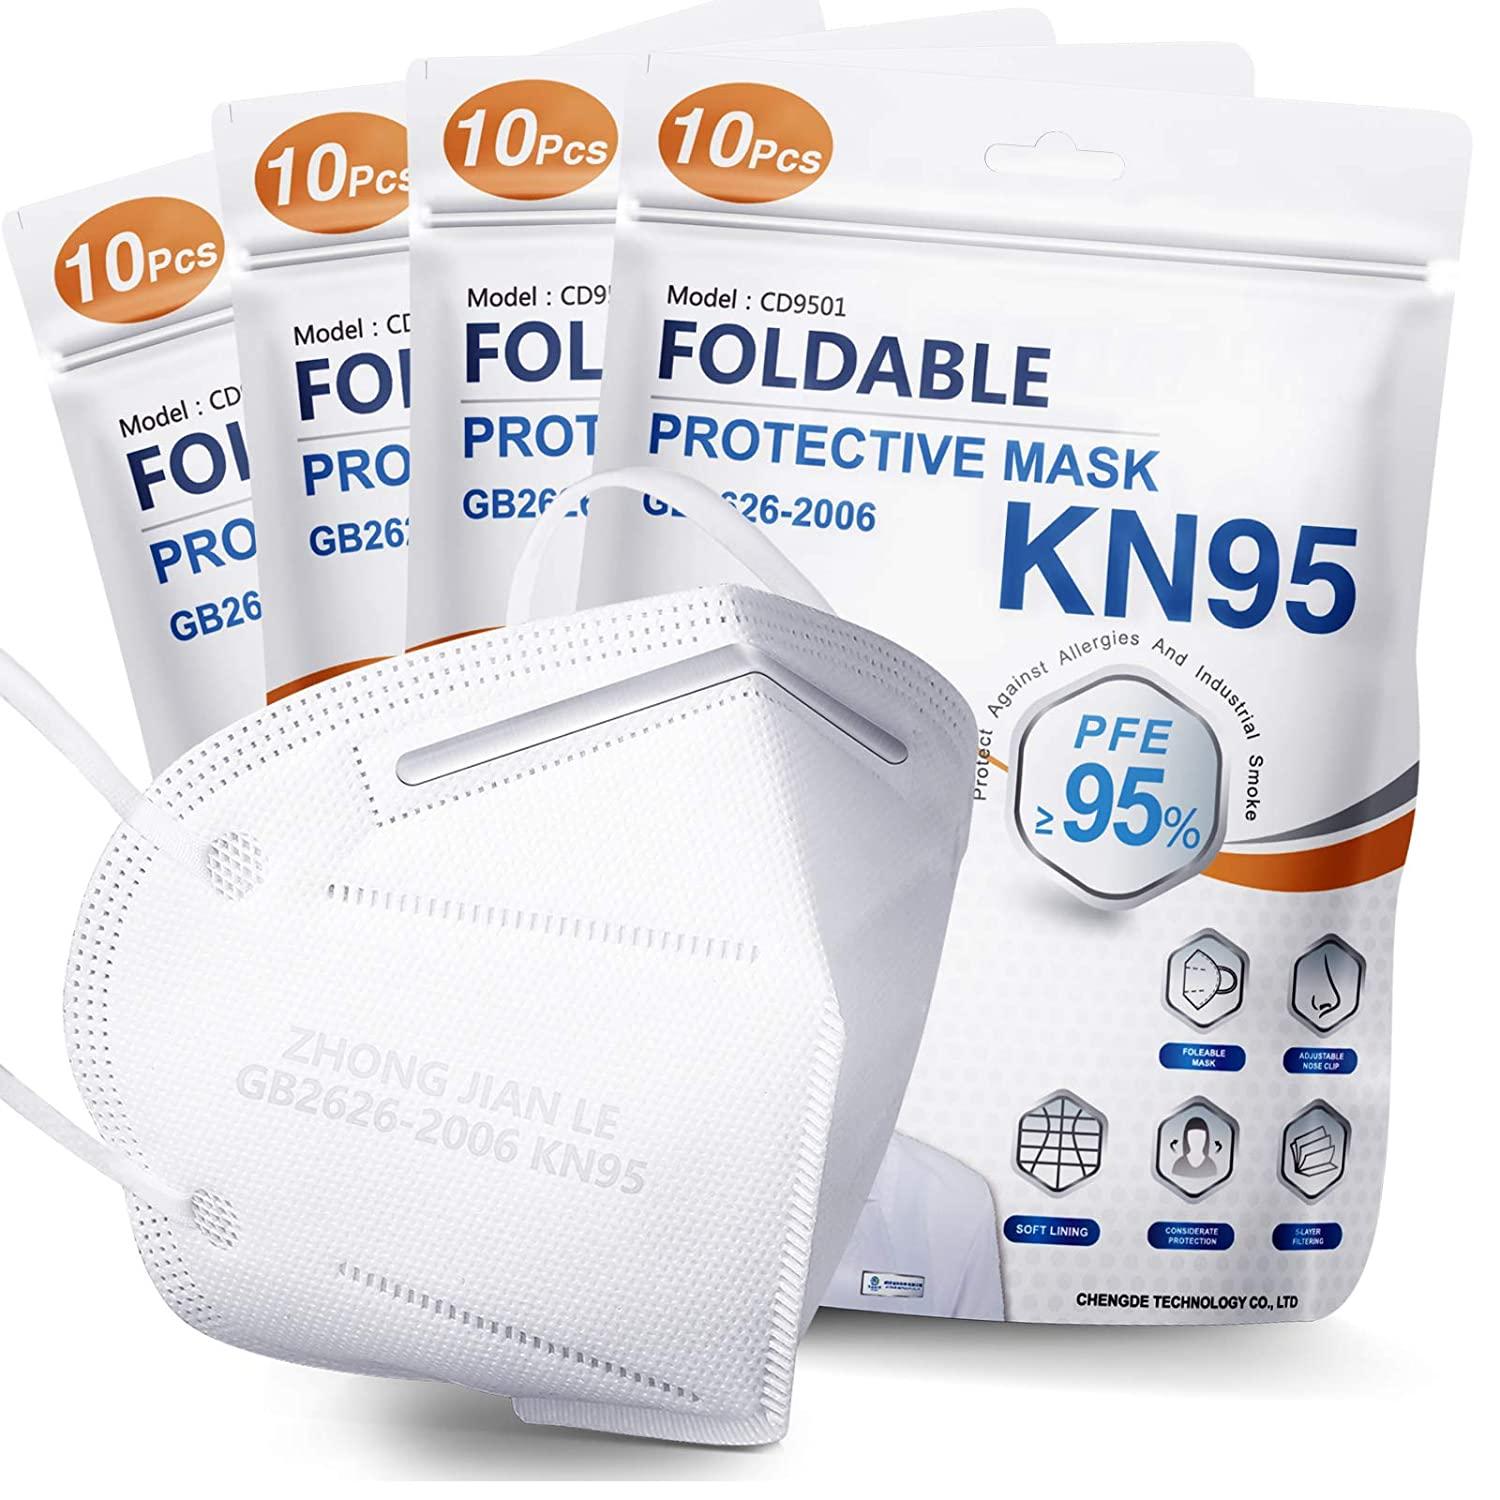 40 Hotodeal KN95 Face Masks for $13